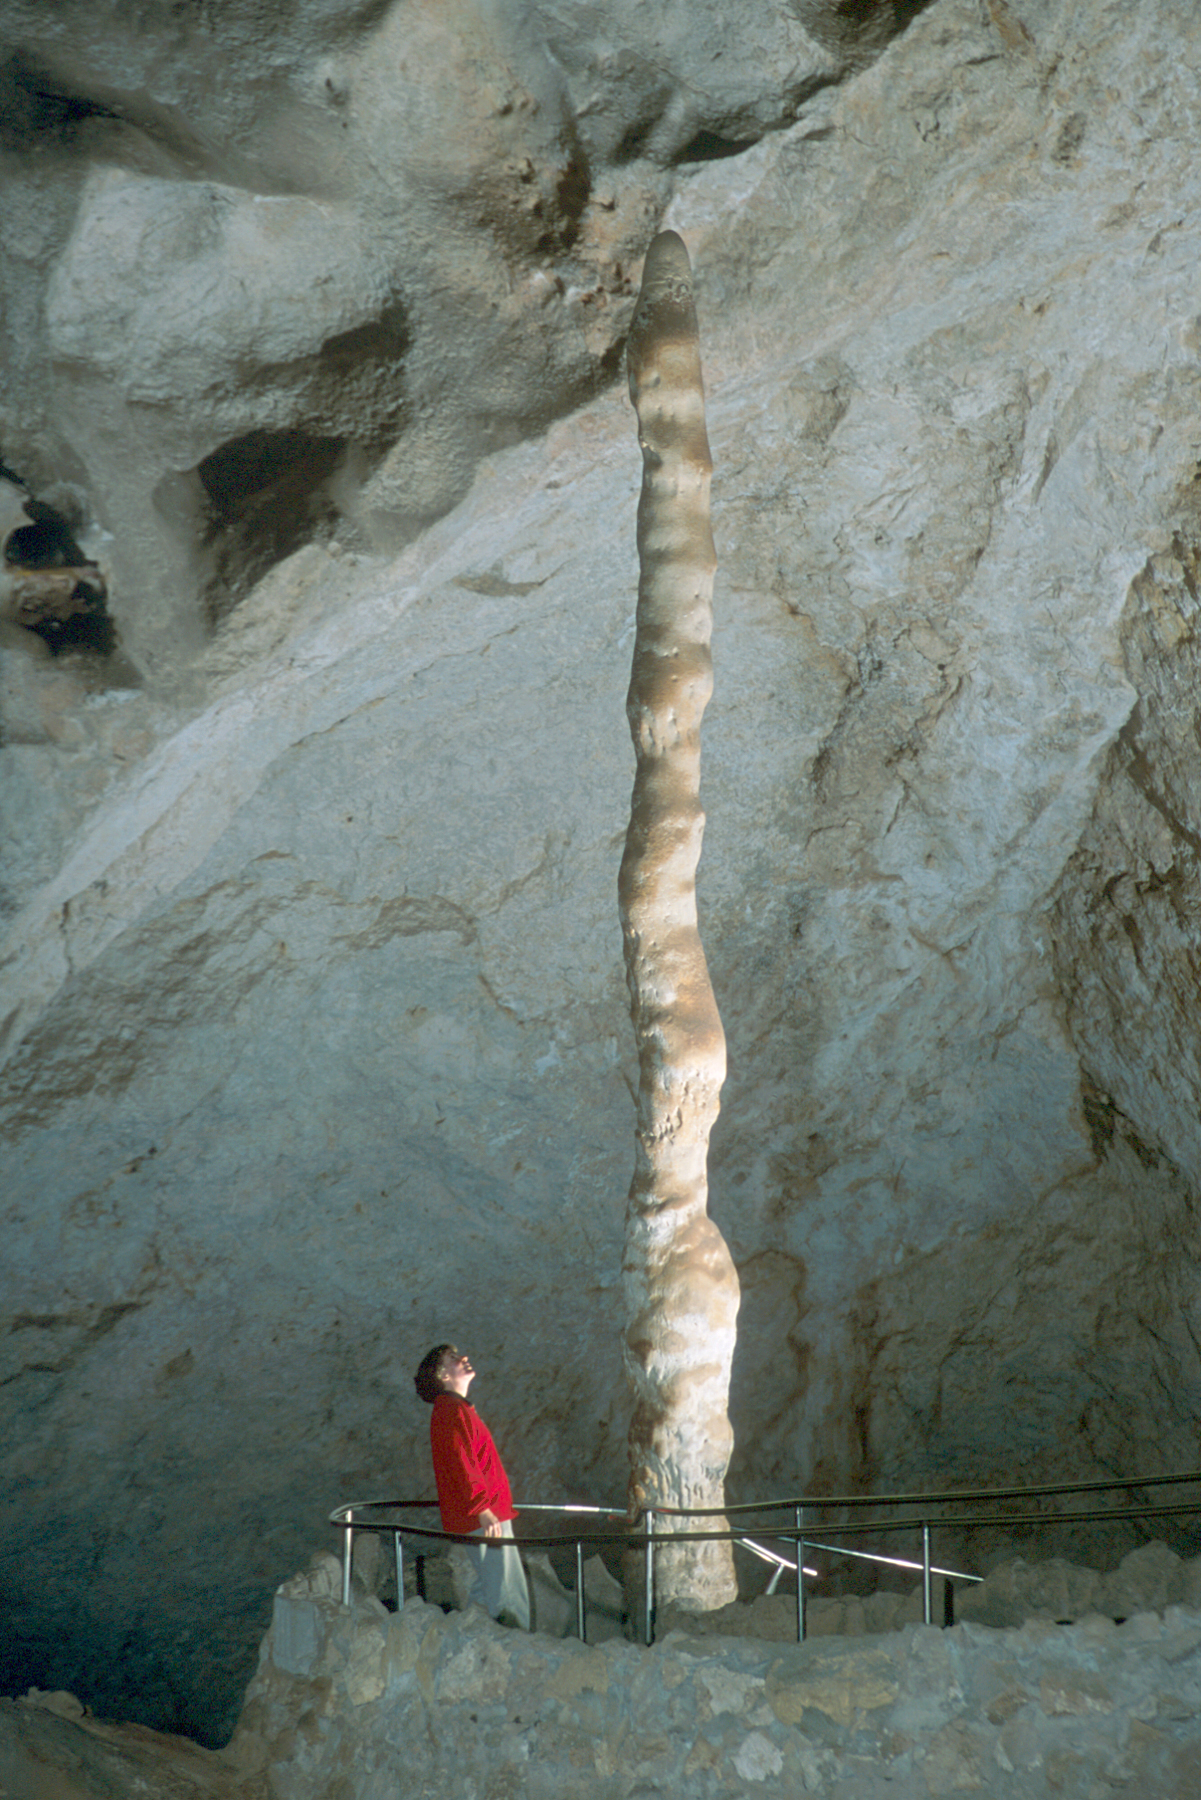 Totem pole formations are long, narrow stalagmites. Due to their crooked nature, the totem poles along the Natural Entrance earned the name the Witch's Fingers. Photo by Peter Jones, courtesy NPS.